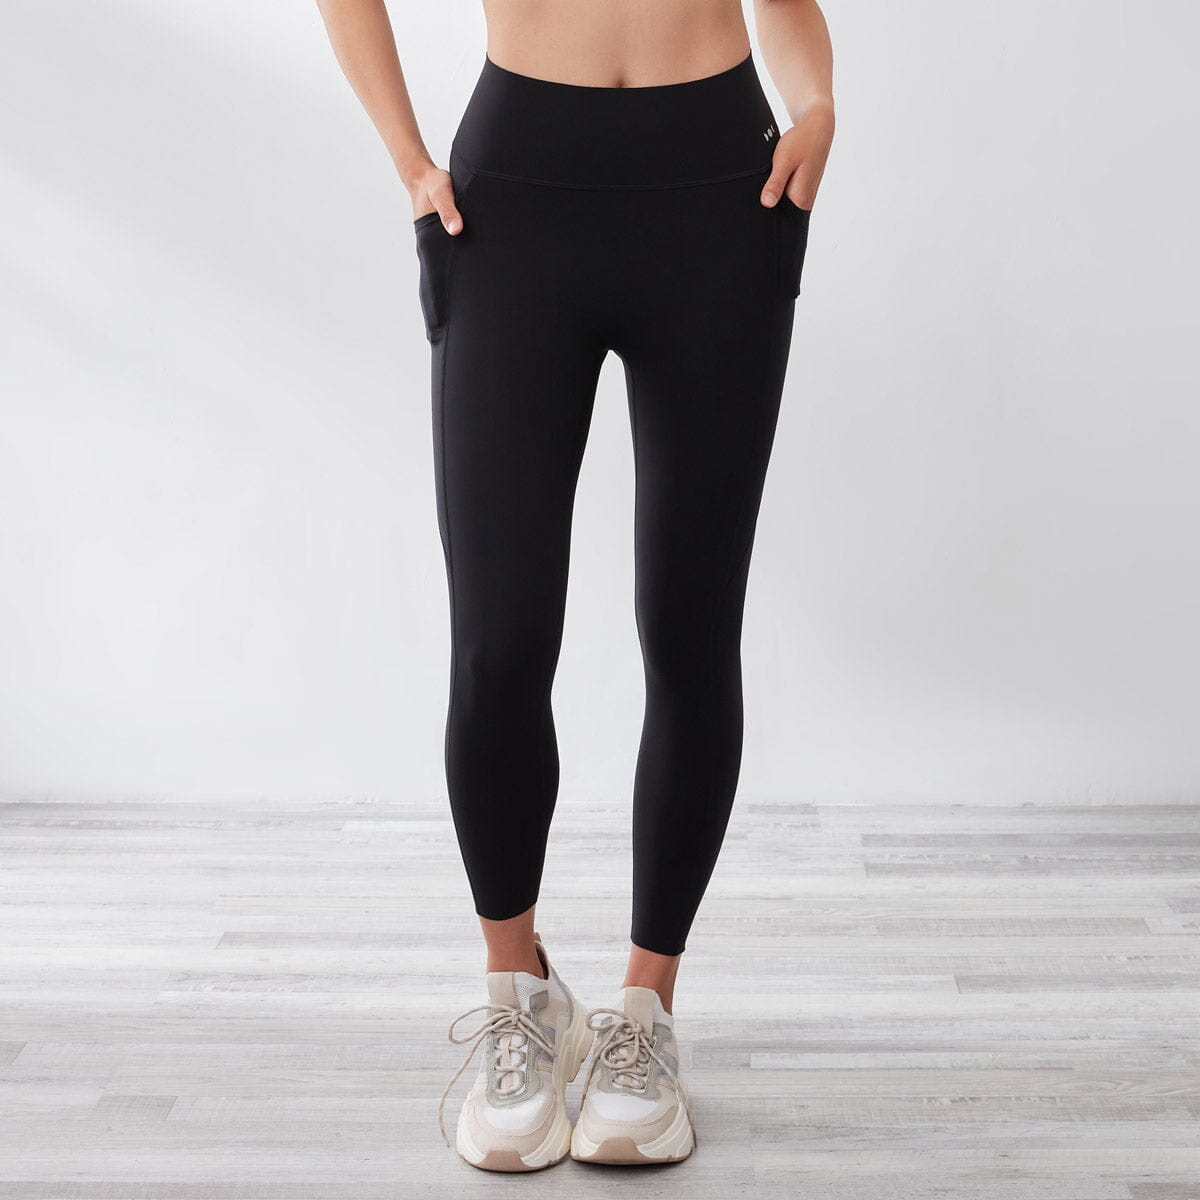 Mid-Waist Float UV Protection Cropped Petite Sports leggings Leggings Her own words SPORTS 